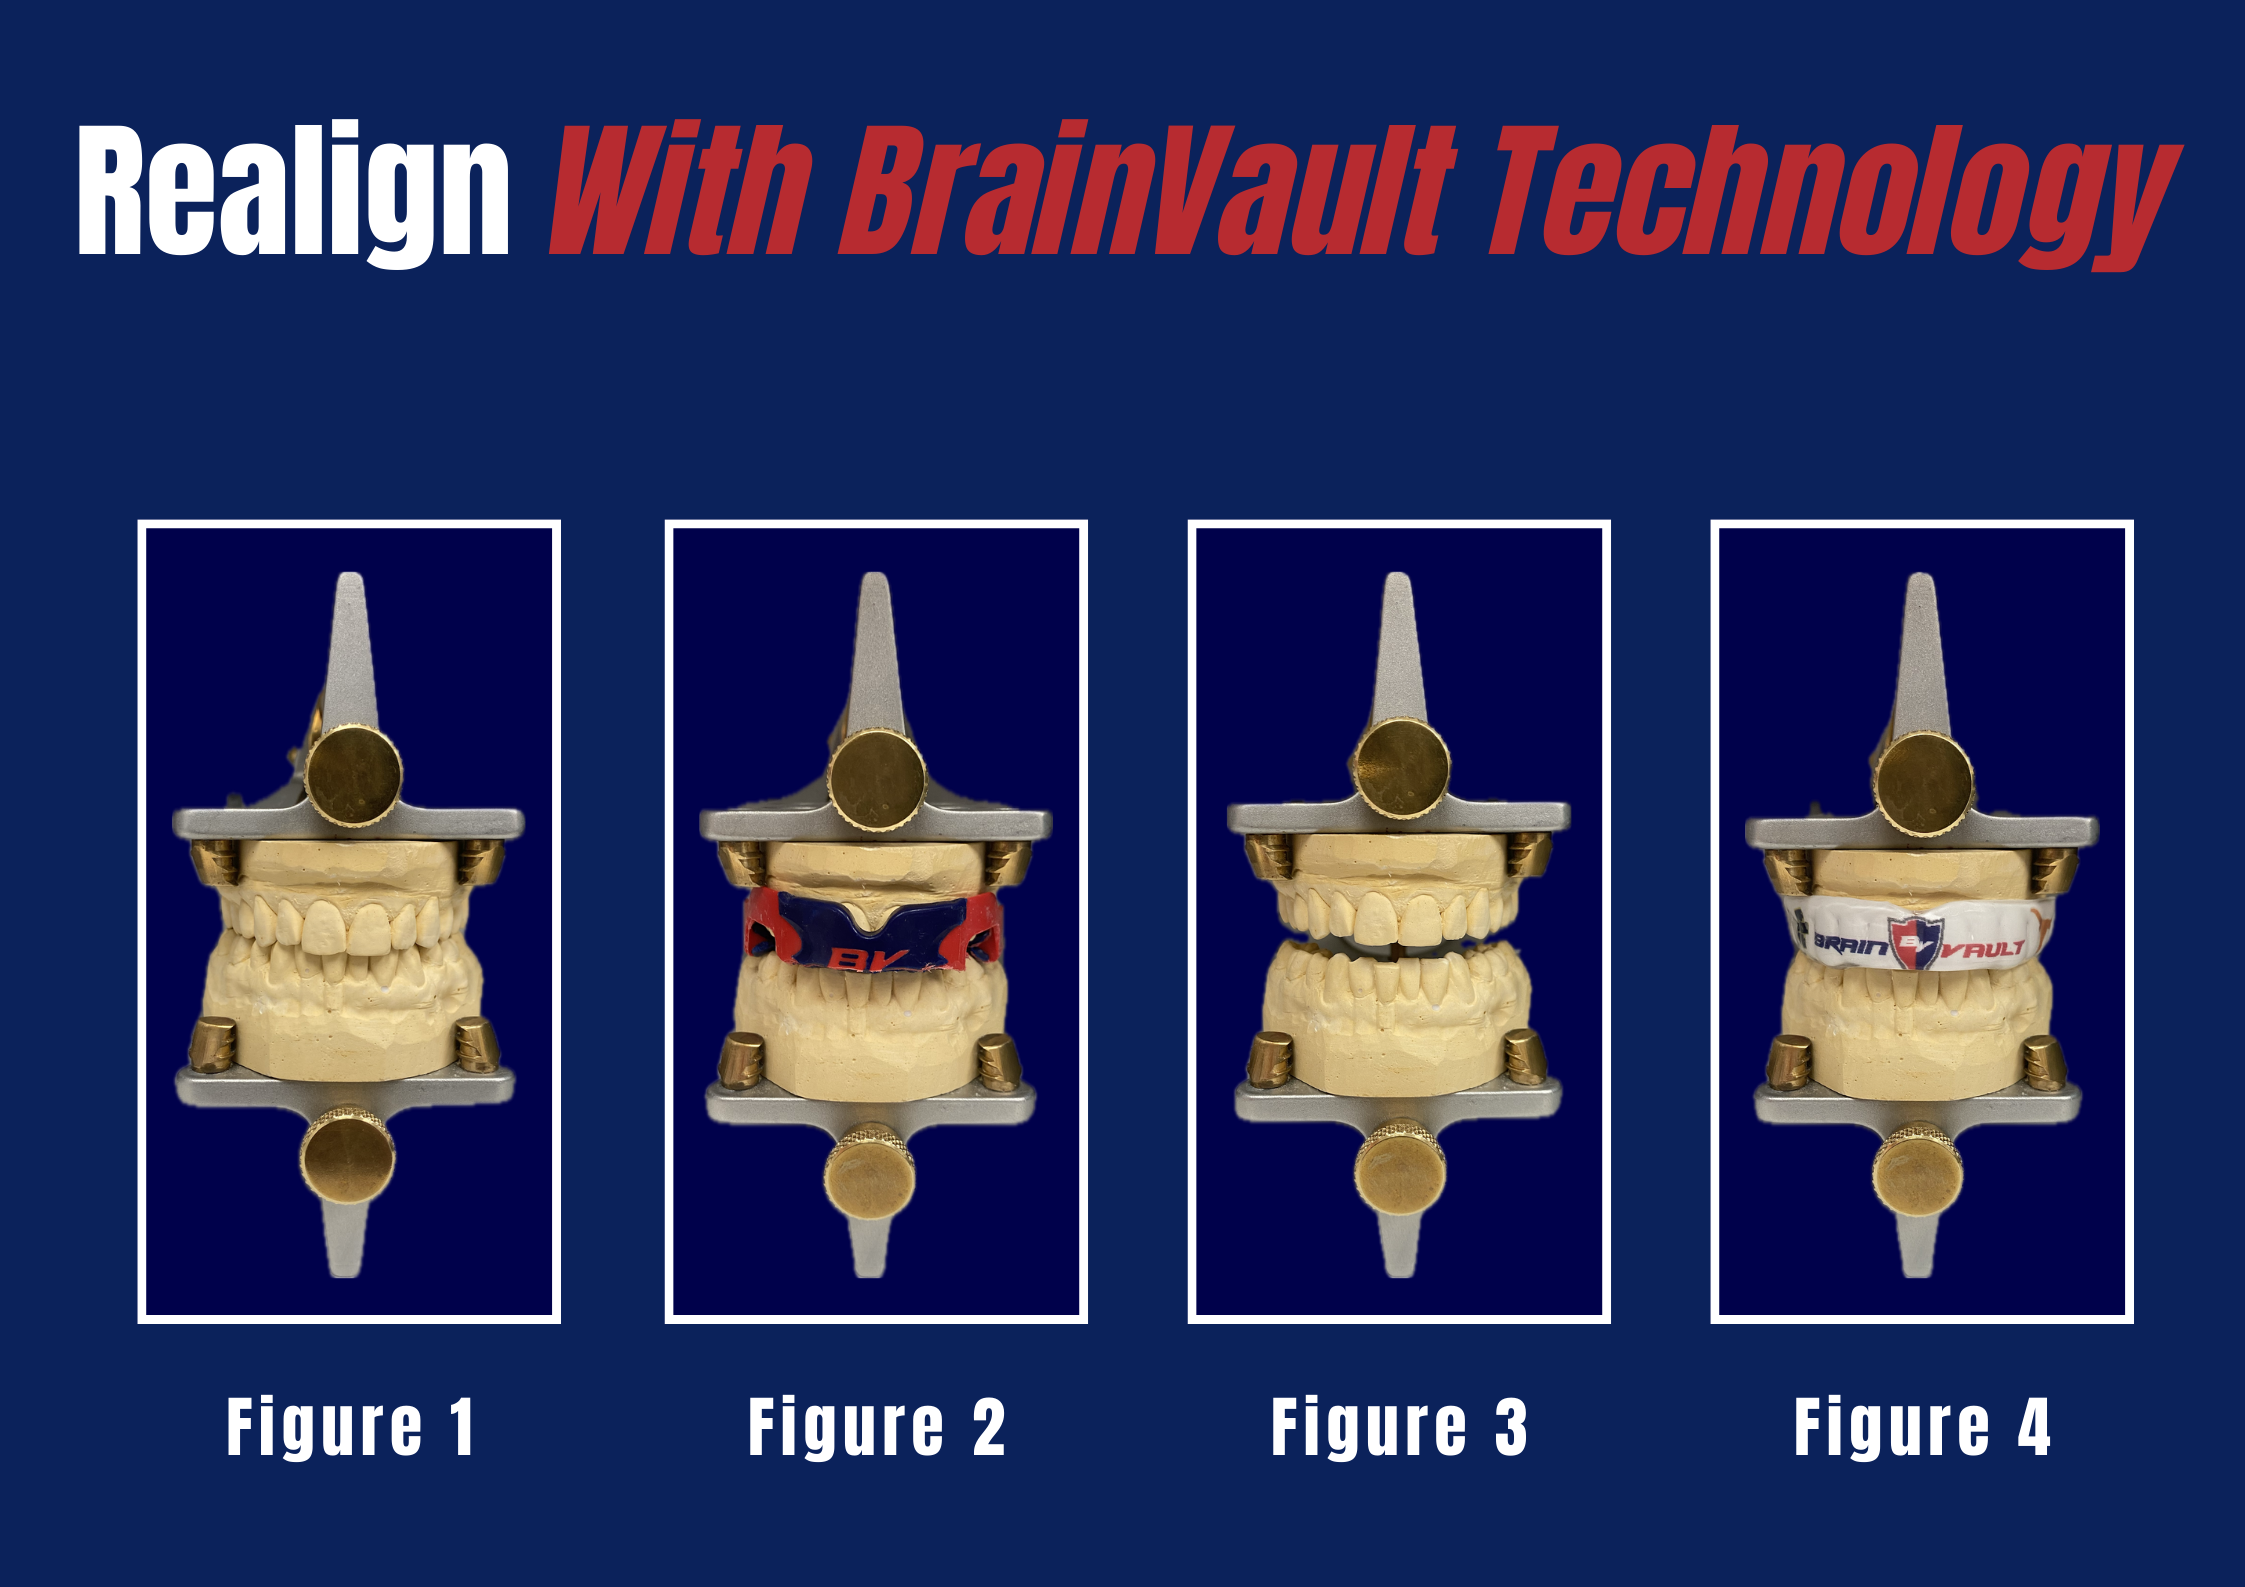 Realign with BrainVault Technology